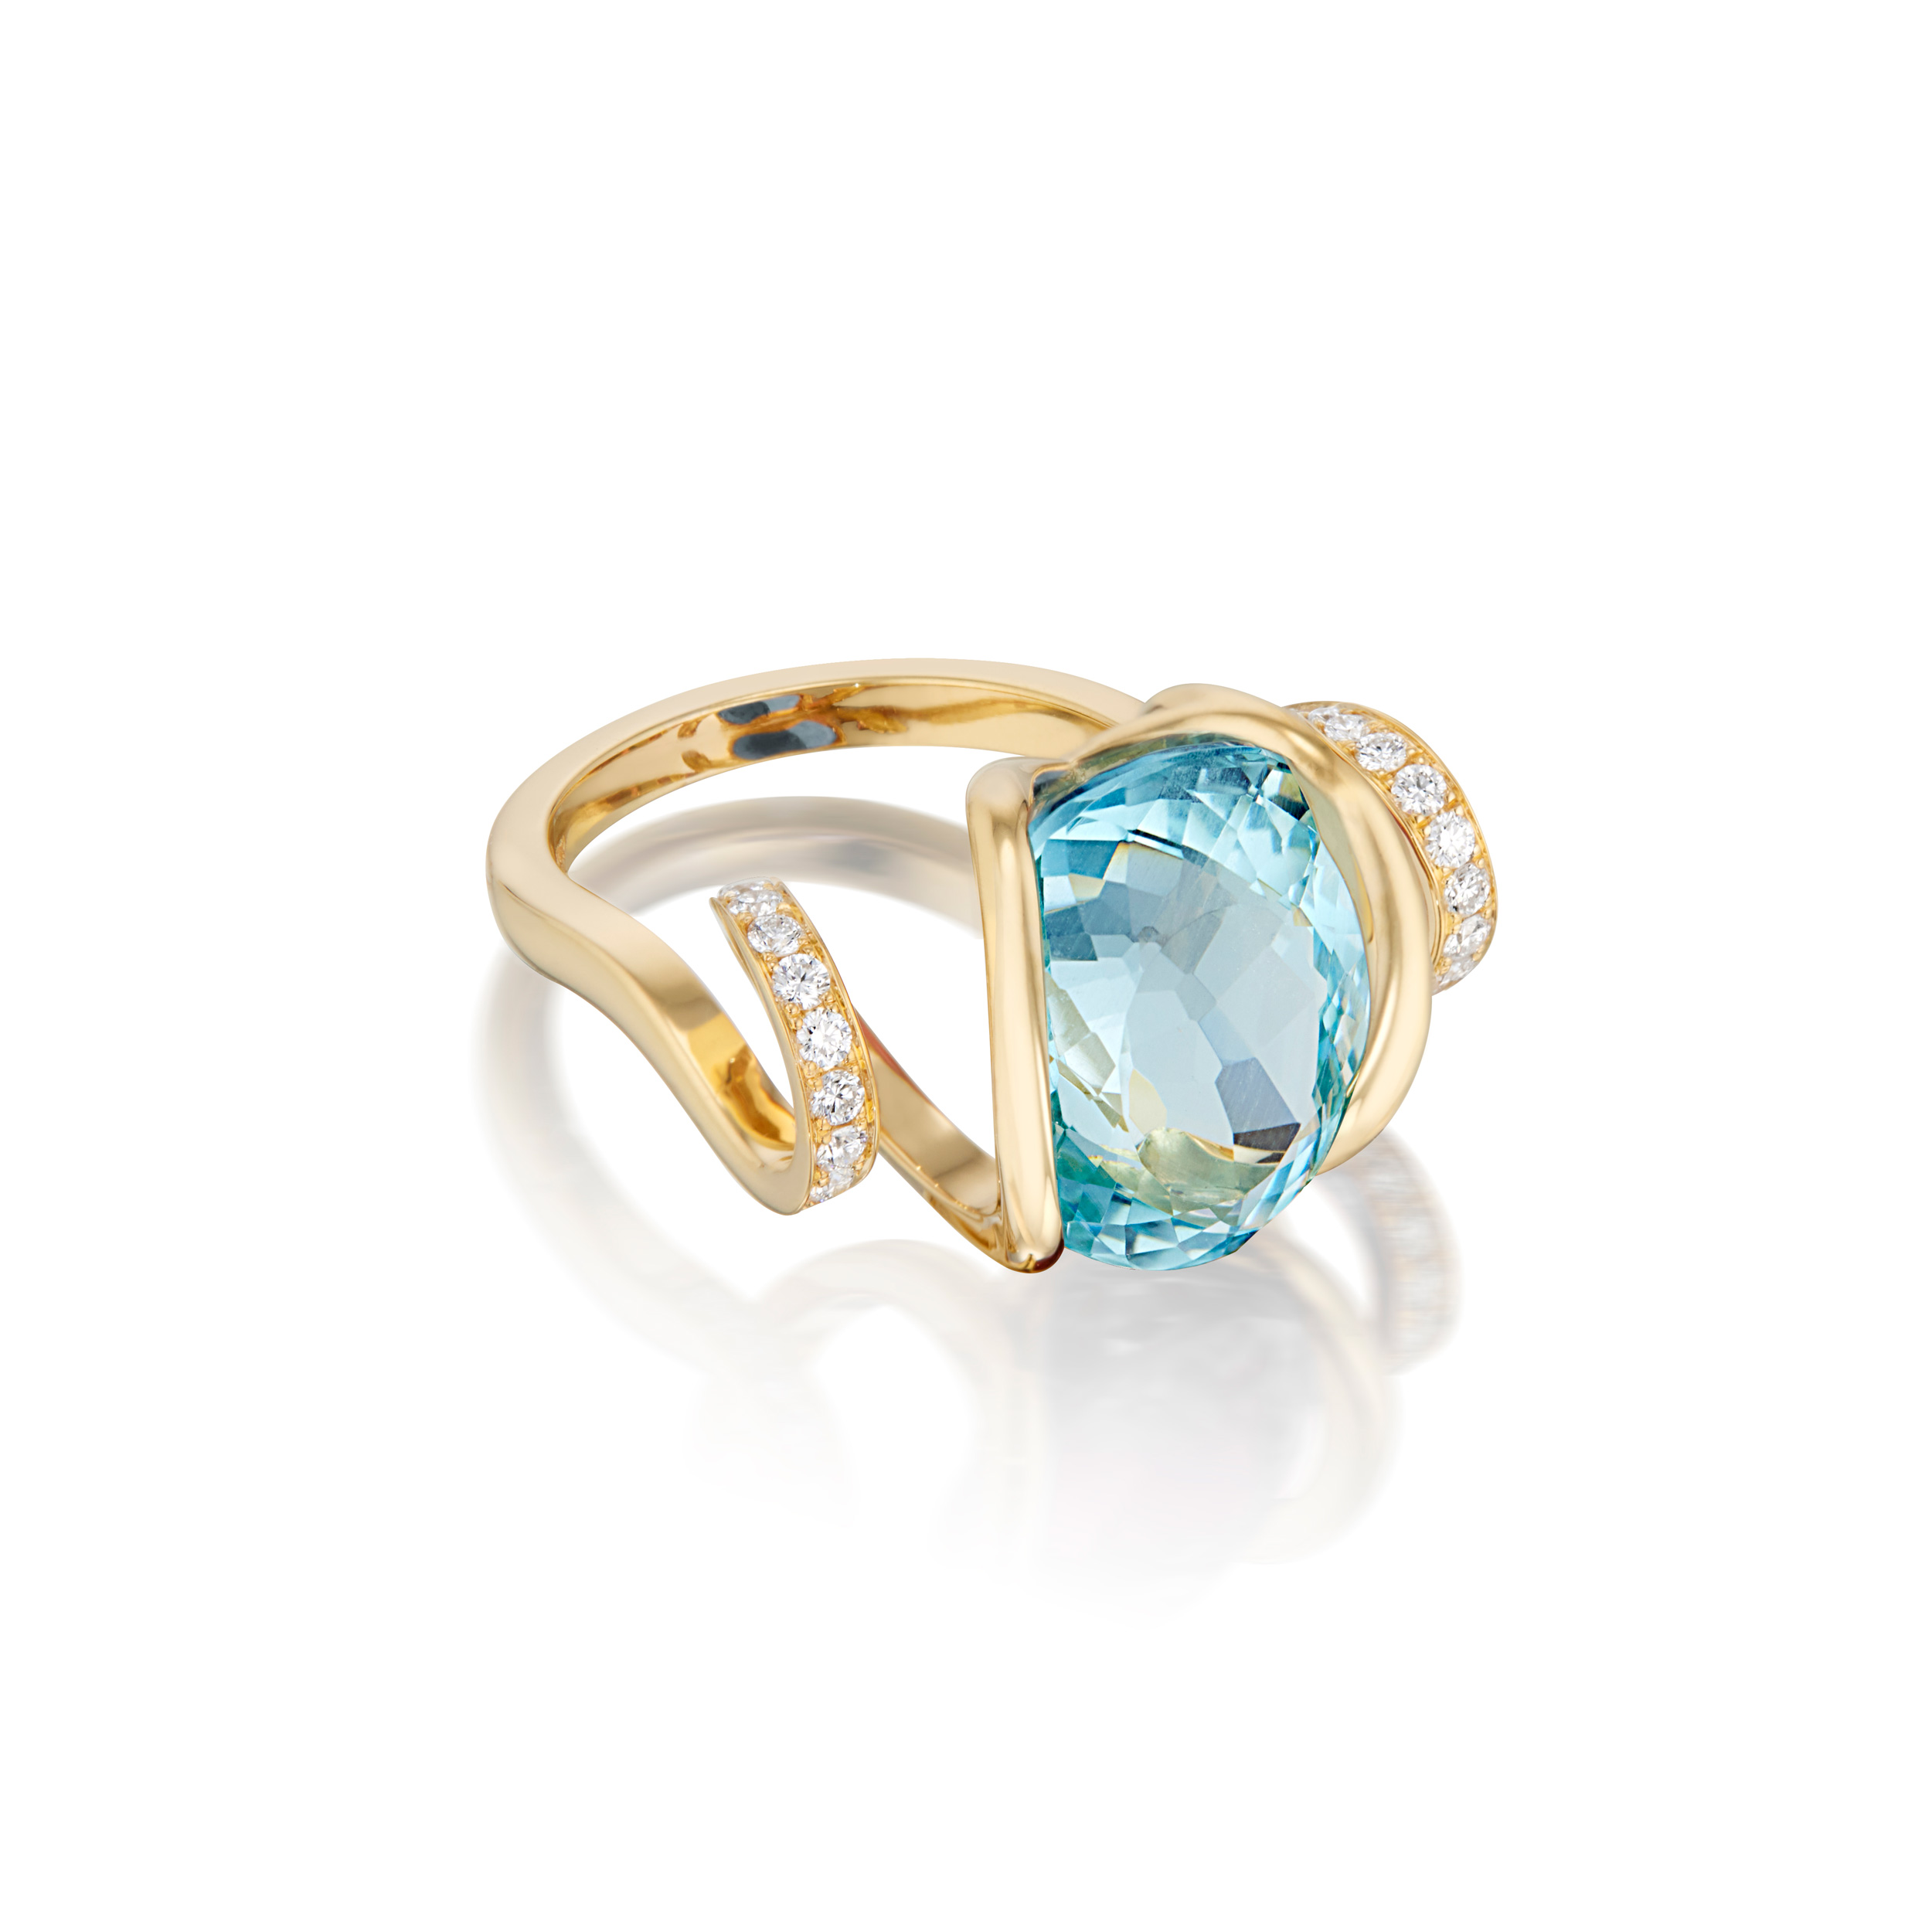 Renisis by Sardwell Ice Curl Ring with Aquamarine Center from Renisis by designer, Sardwell. It is made of 18K yellow gold with aquamarine and pavé diamonds. Its unique design includes a curled gold shape and setting.